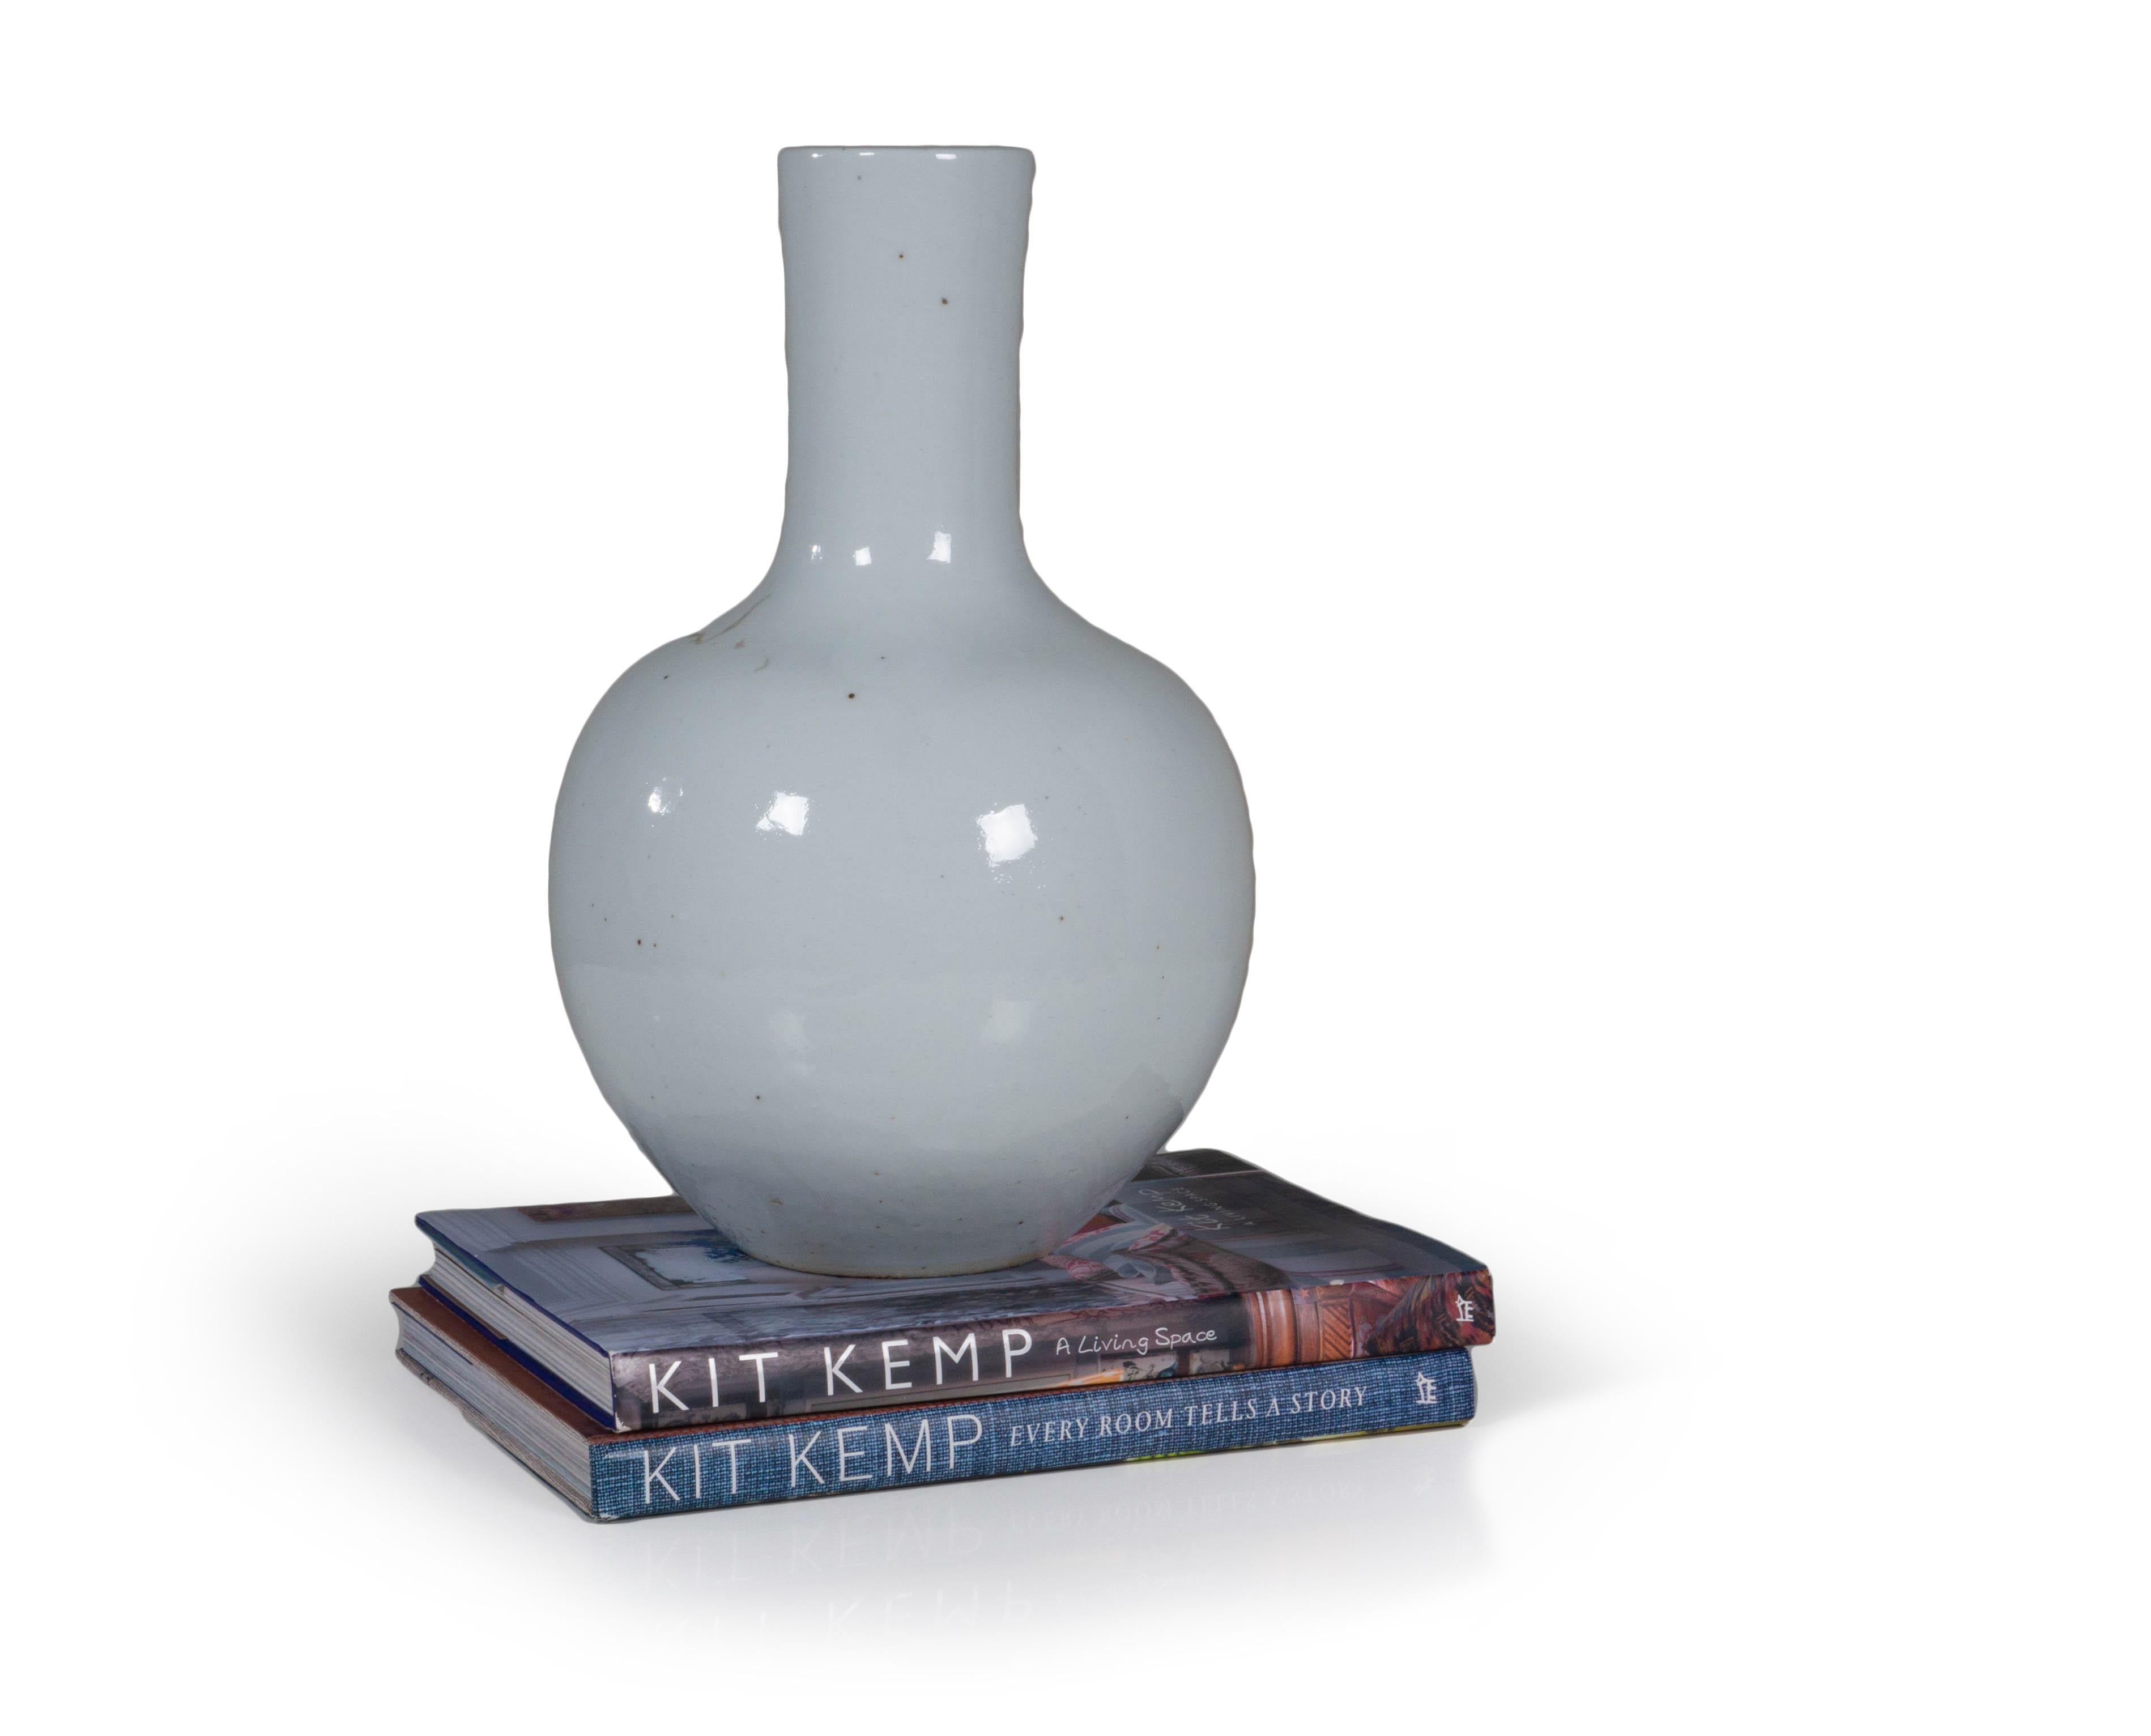 A modern take on the classic vase, this white ceramic version is a versatile piece for any decor. Designed with a wide base, this design makes it perfect for pairing with larger arrangements. This elegant white ceramic vase is finished with a glow